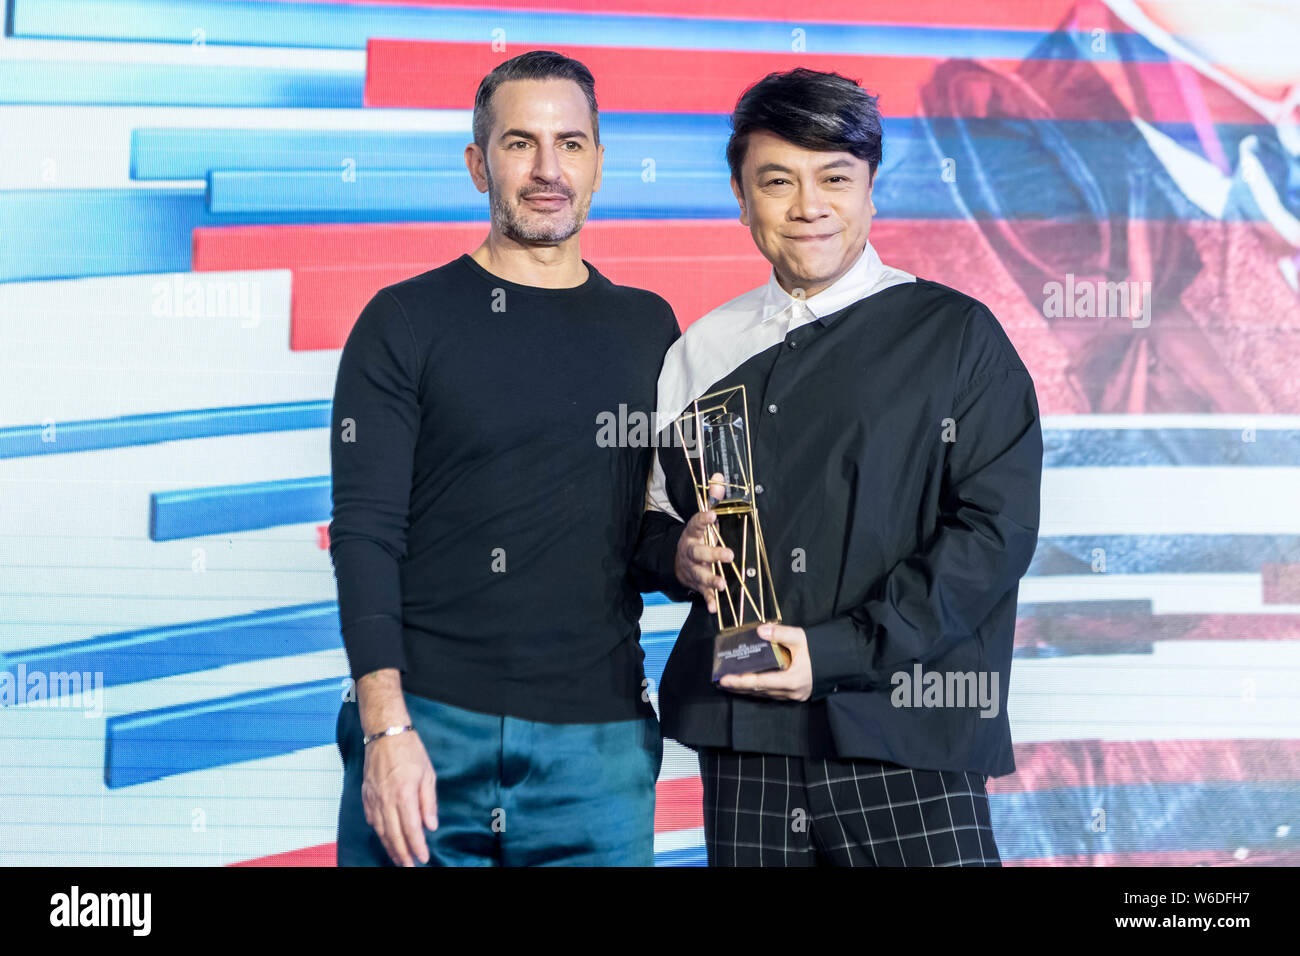 American fashion designer Marc Jacobs, left, and Taiwanese host